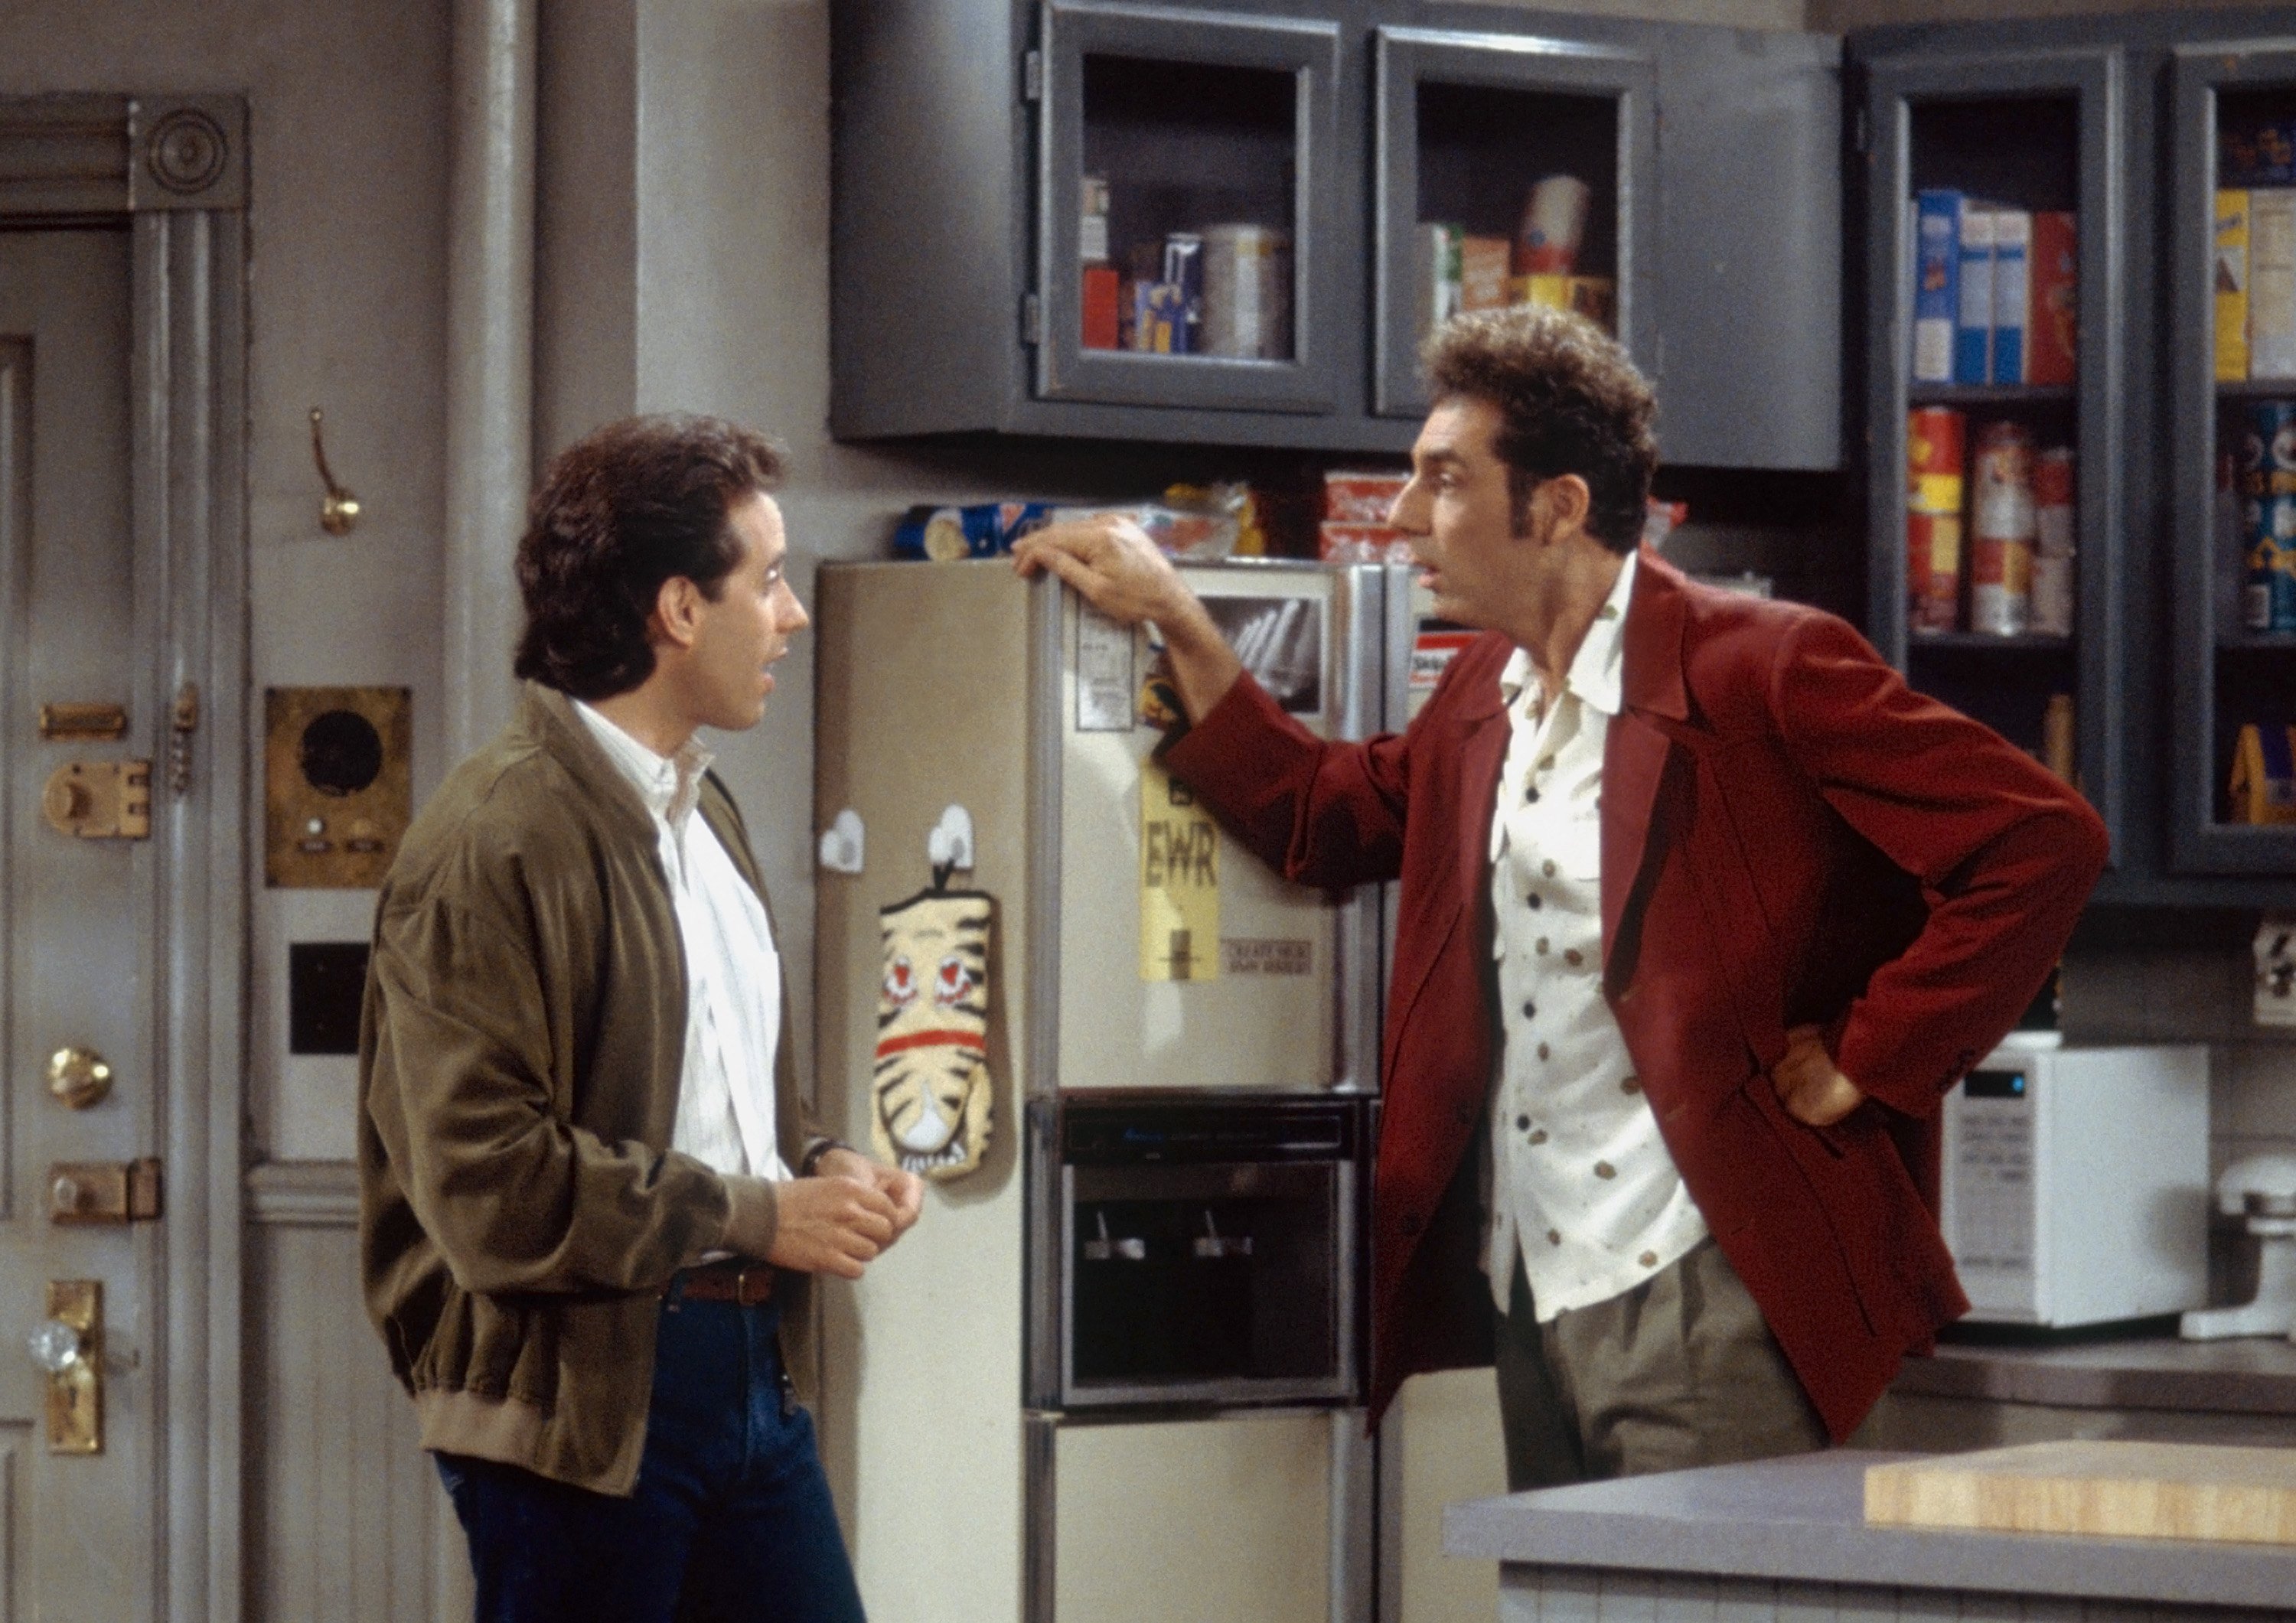 Jerry Seinfeld as Jerry Seinfeld, Michael Richards as Cosmo Kramer stand in Jerry's kitchen